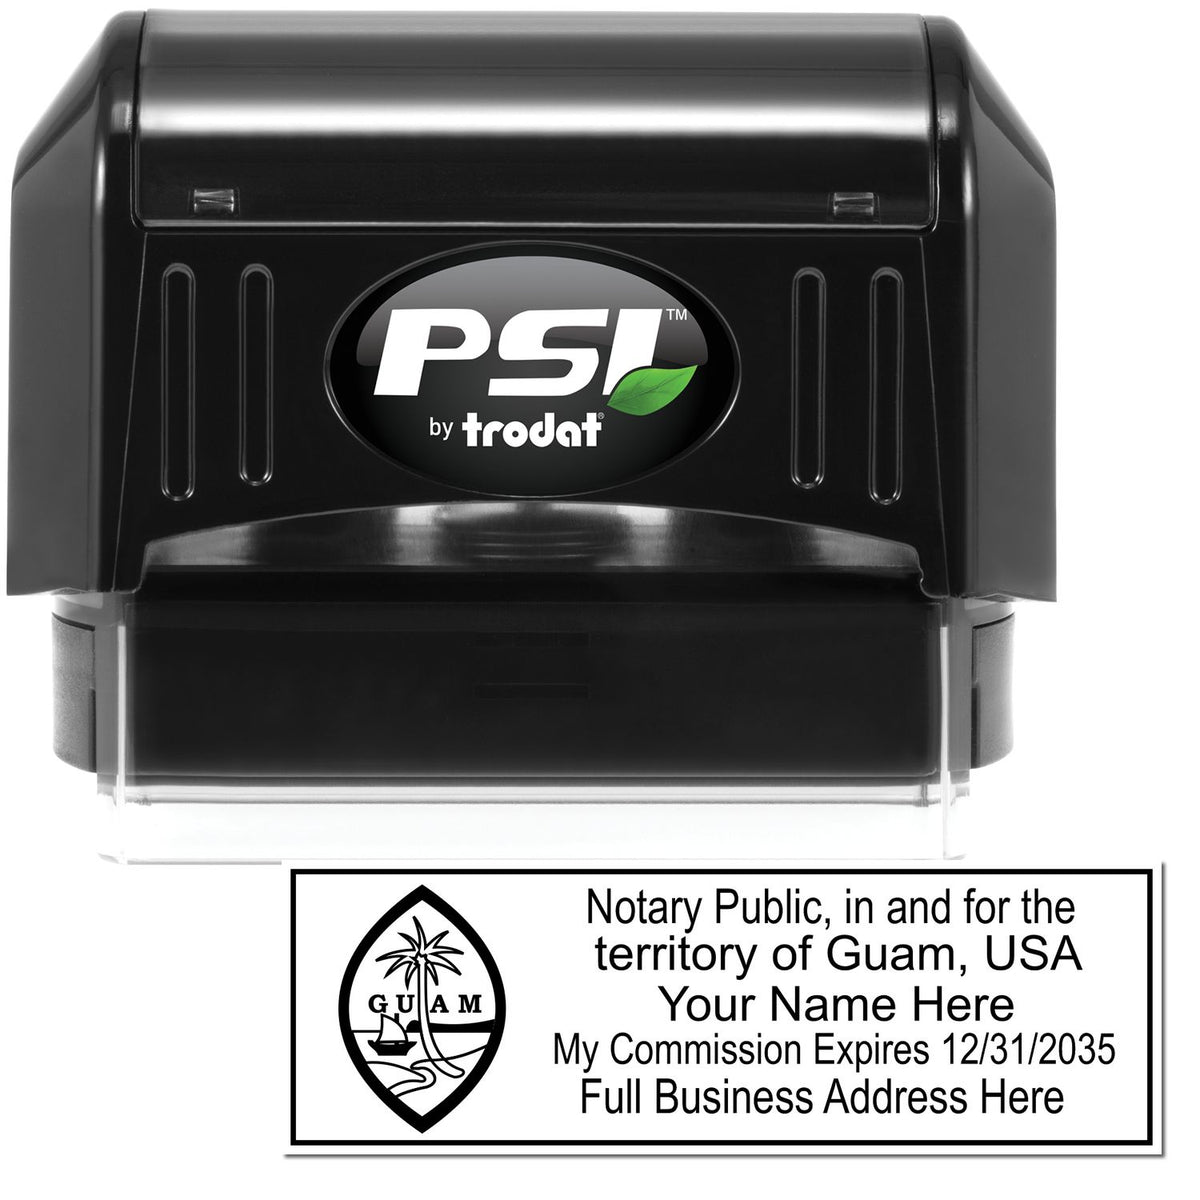 The main image for the PSI Guam Notary Stamp depicting a sample of the imprint and electronic files